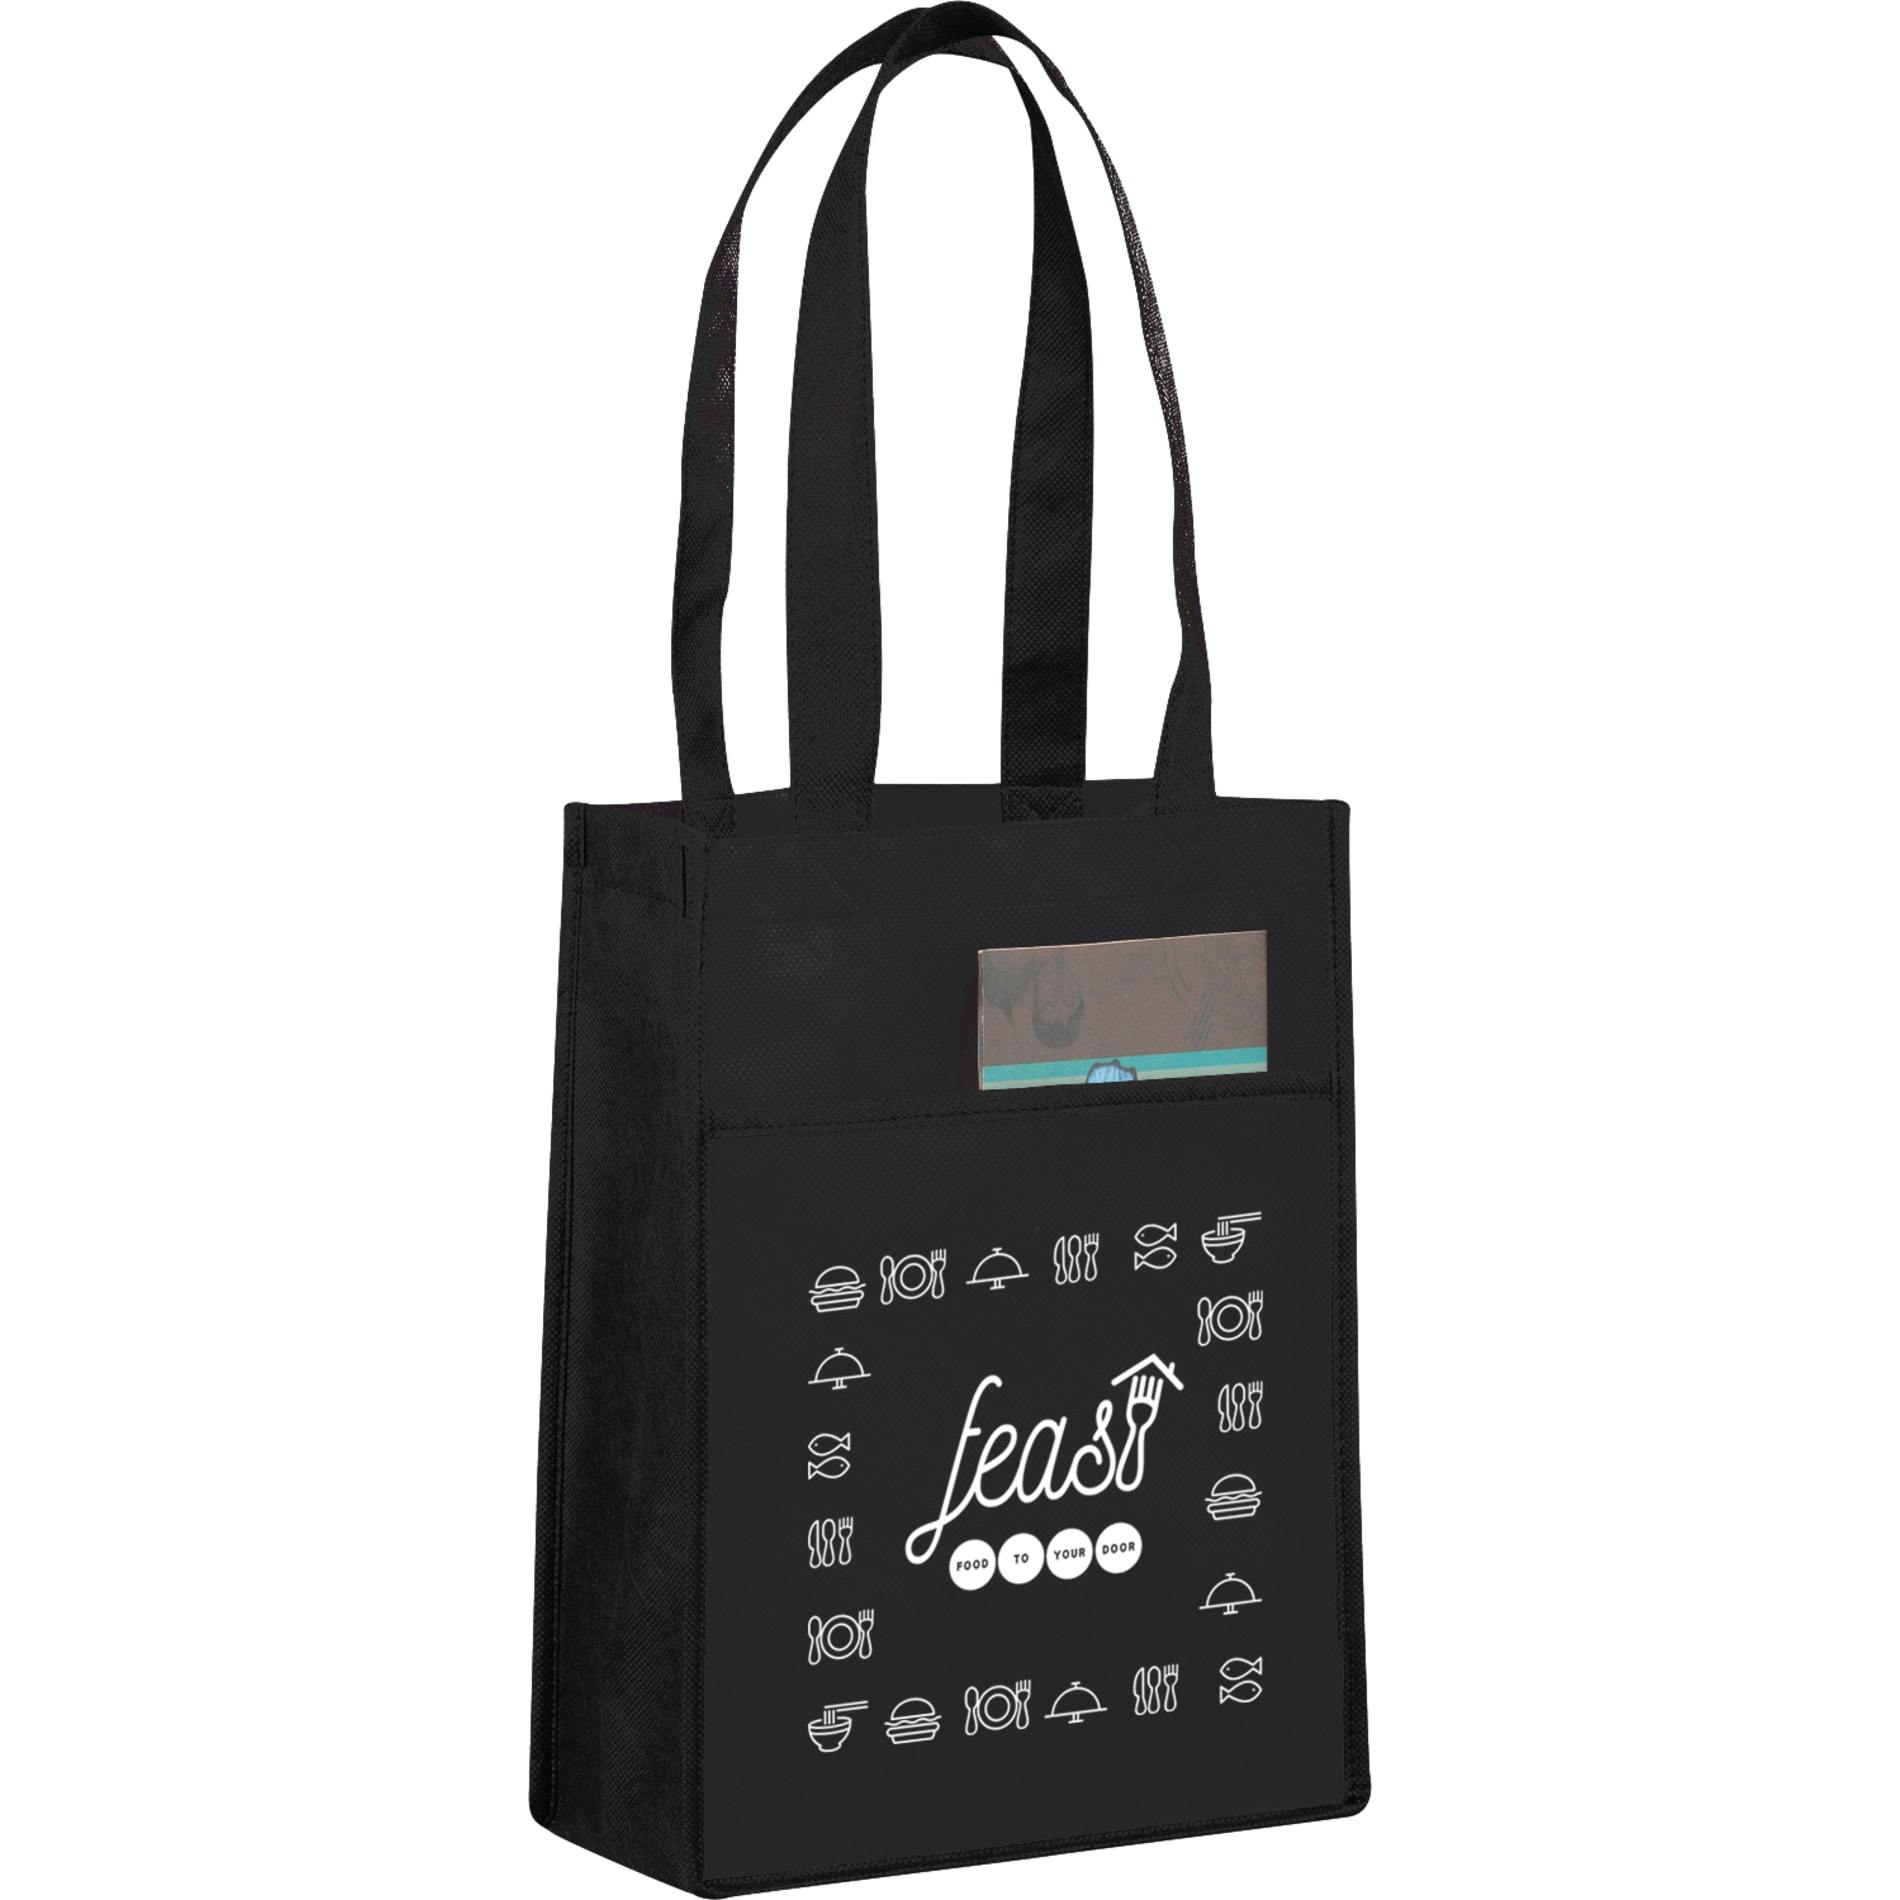 Non-Woven Gift Tote with Pocket - additional Image 3